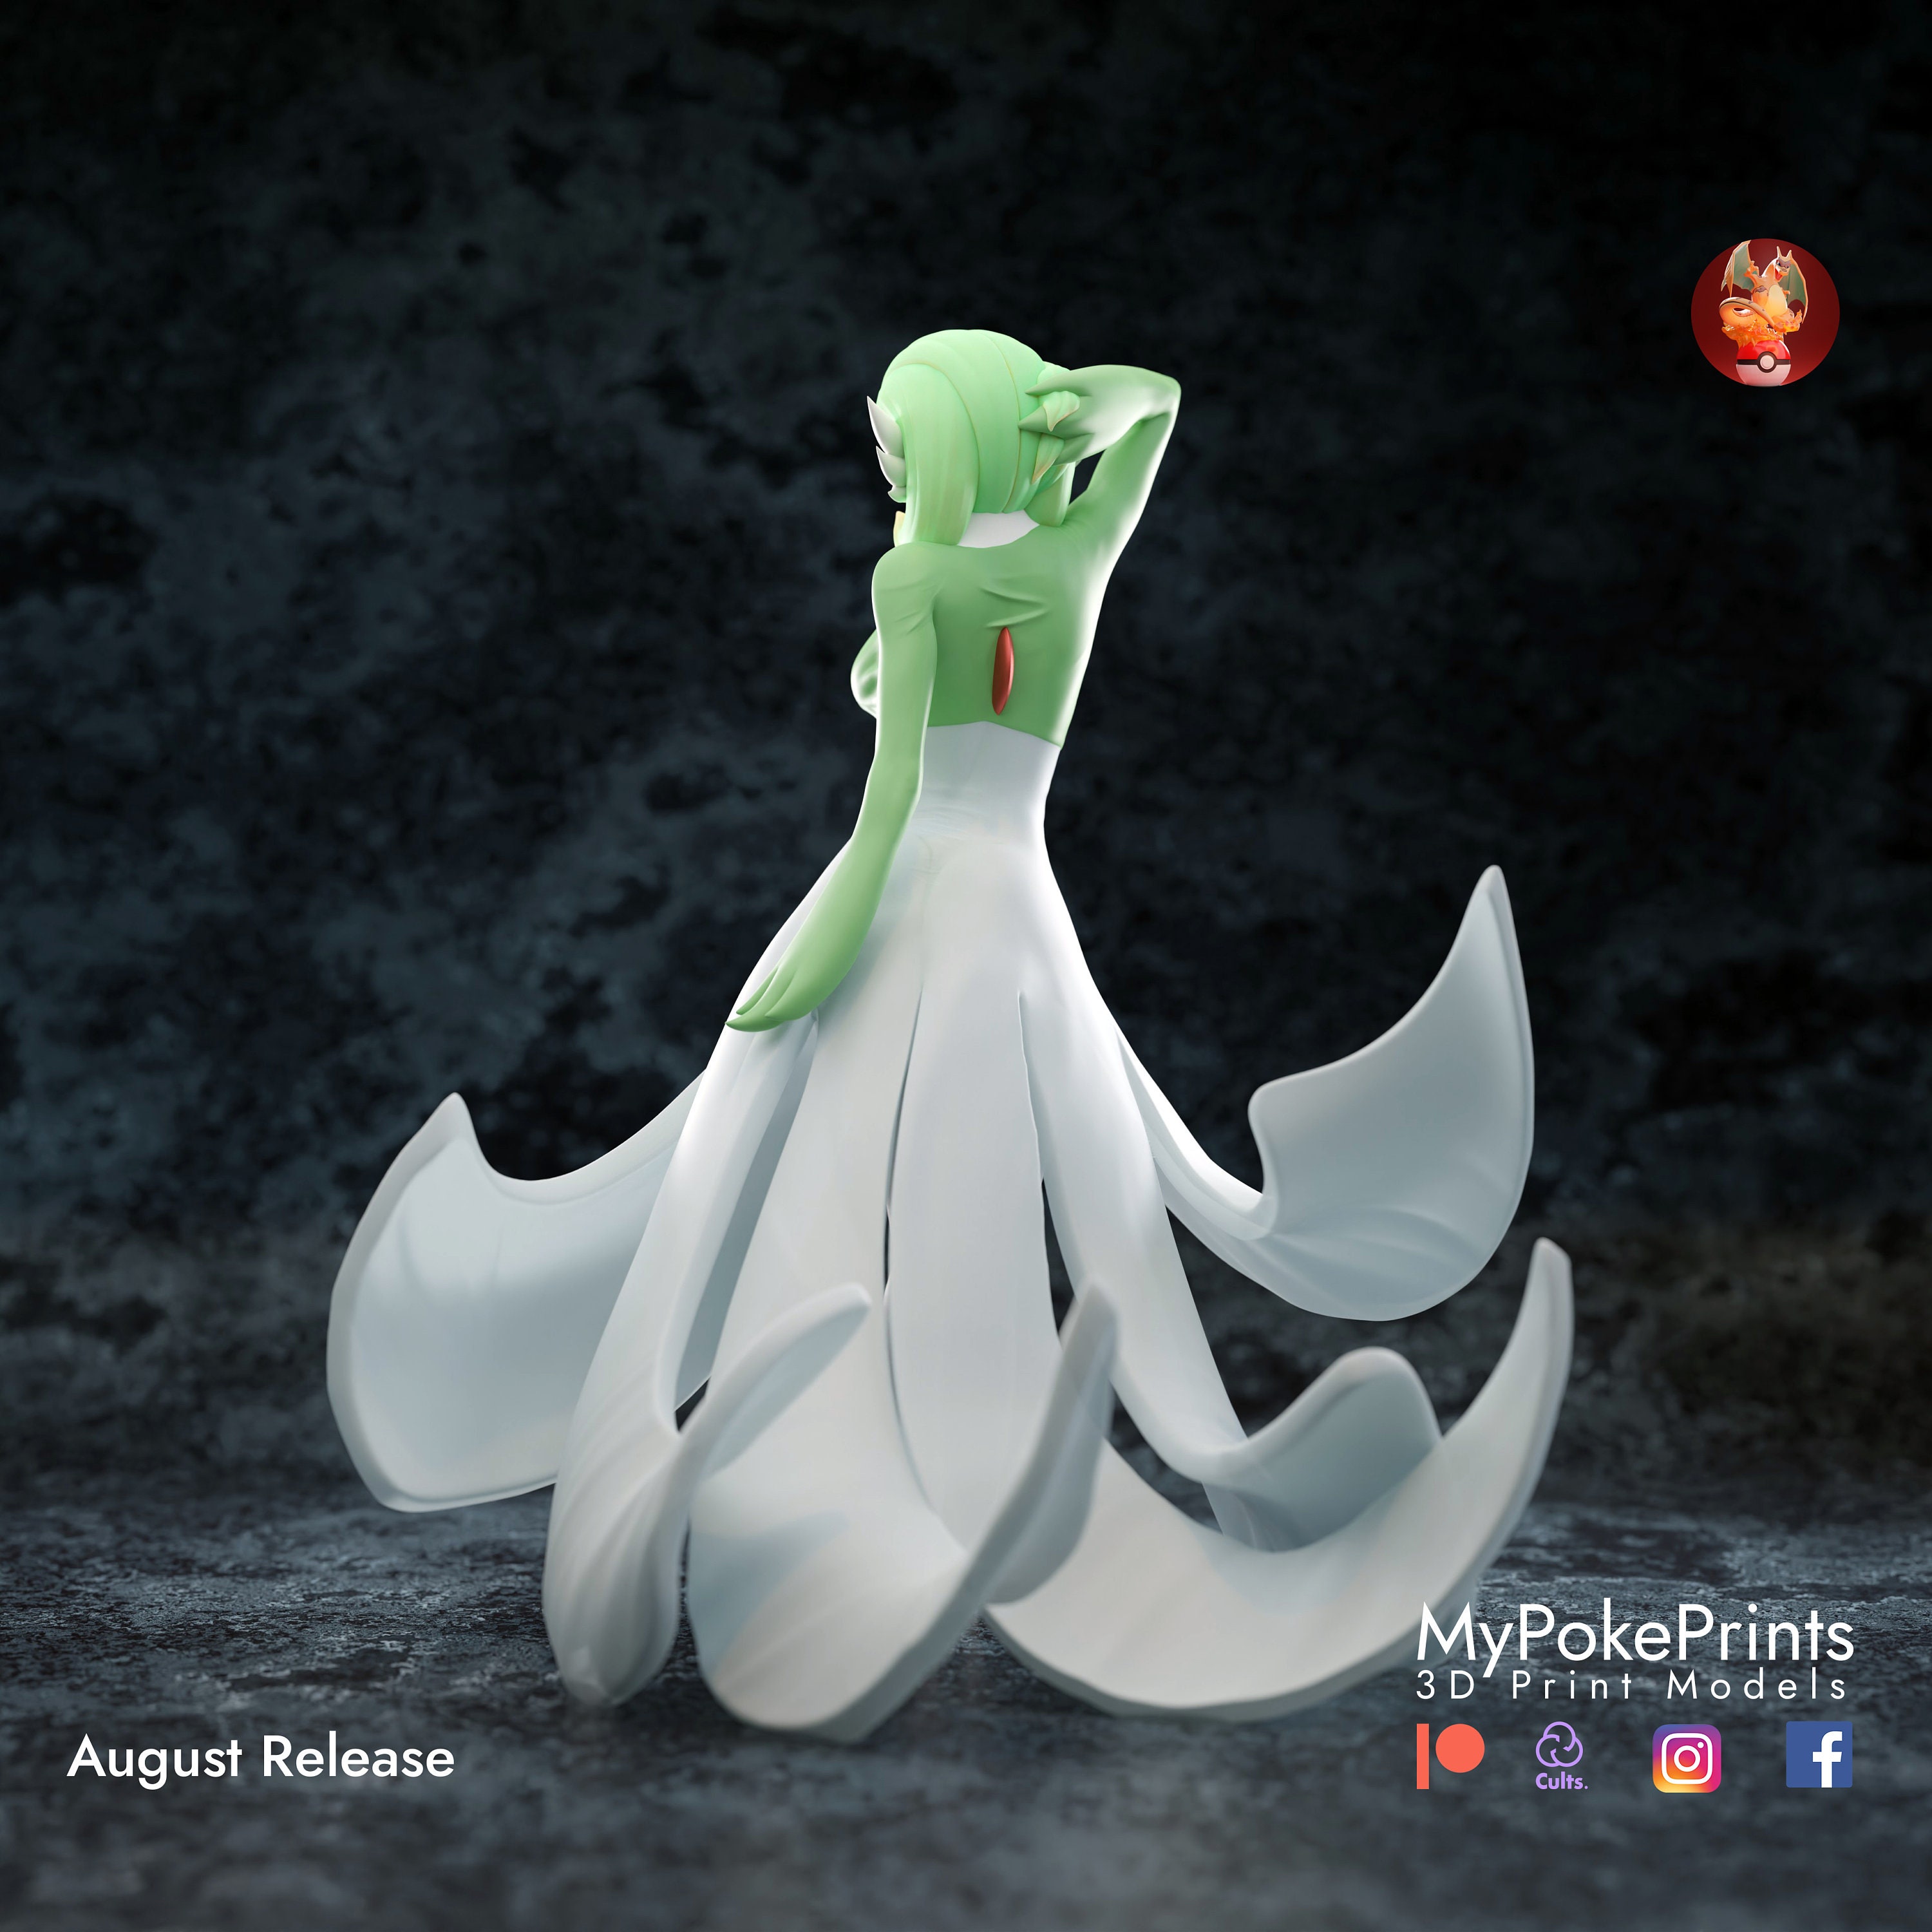 Gardevoir Pokemon Unite Collectibles pokeball Pokedex 04mm Layer Height  Painted and Unpainted Versions Available 